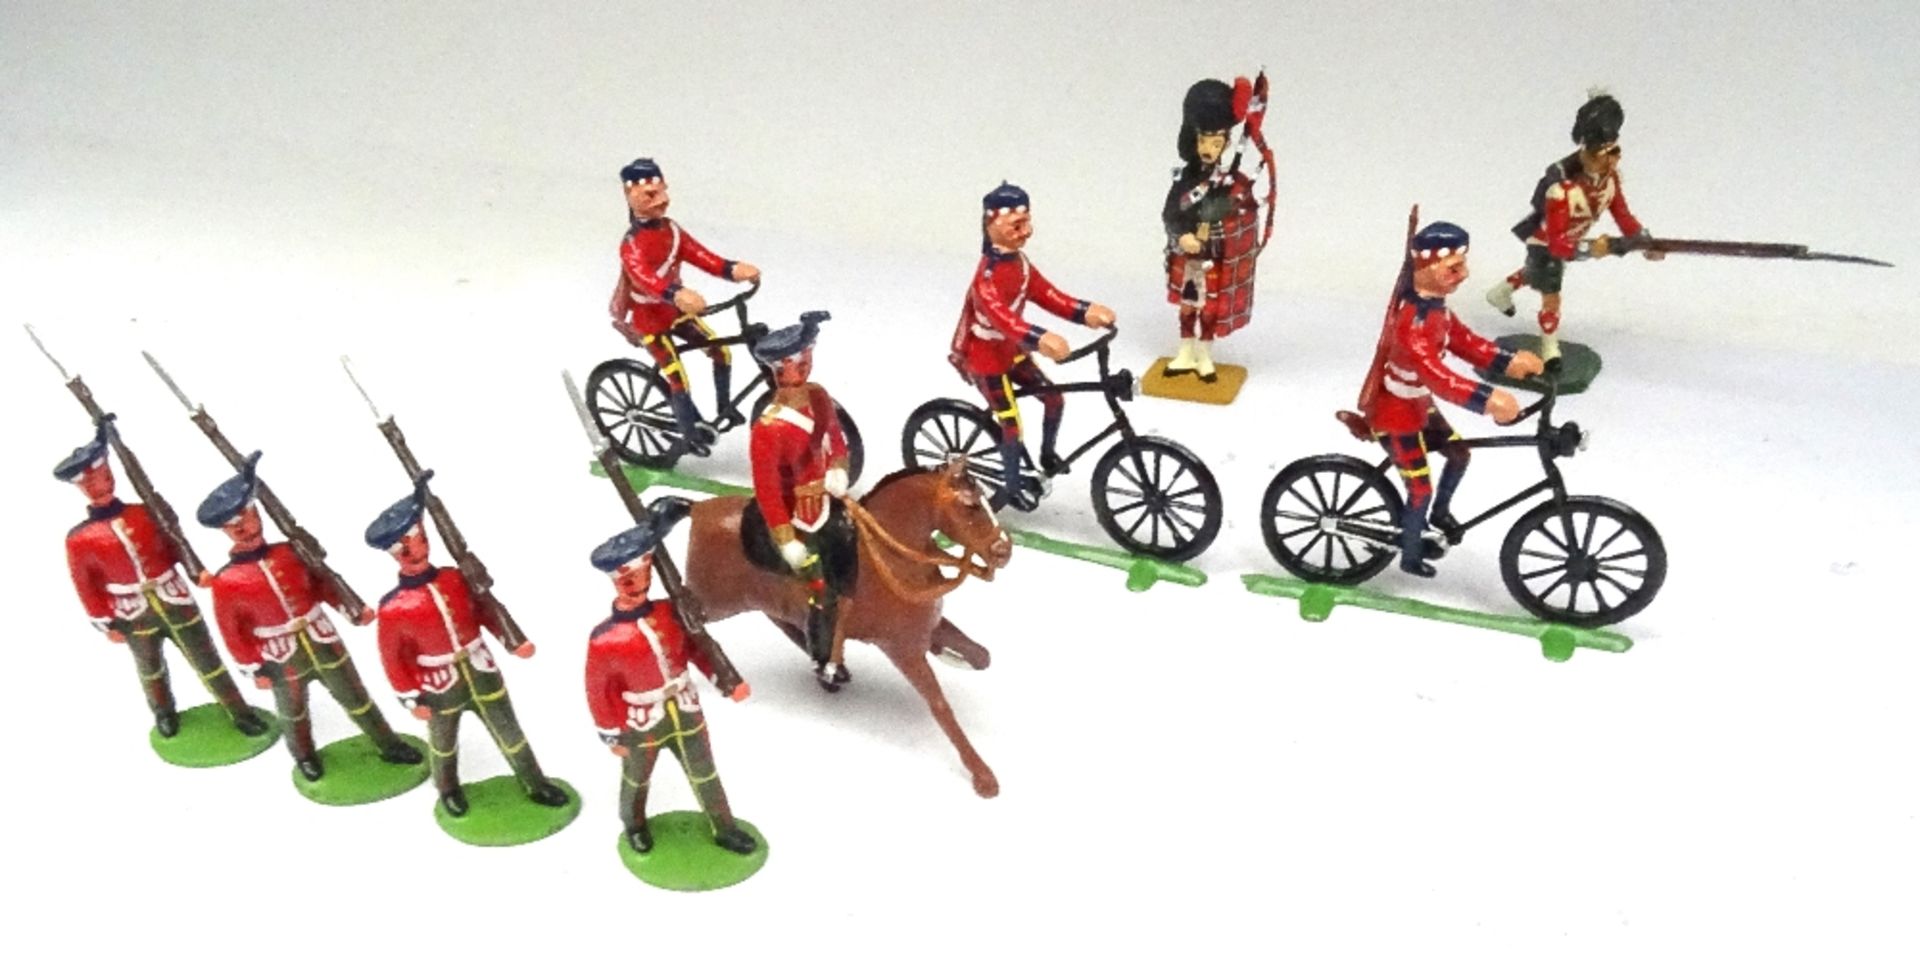 Highlander New Toy Soldiers - Image 4 of 7